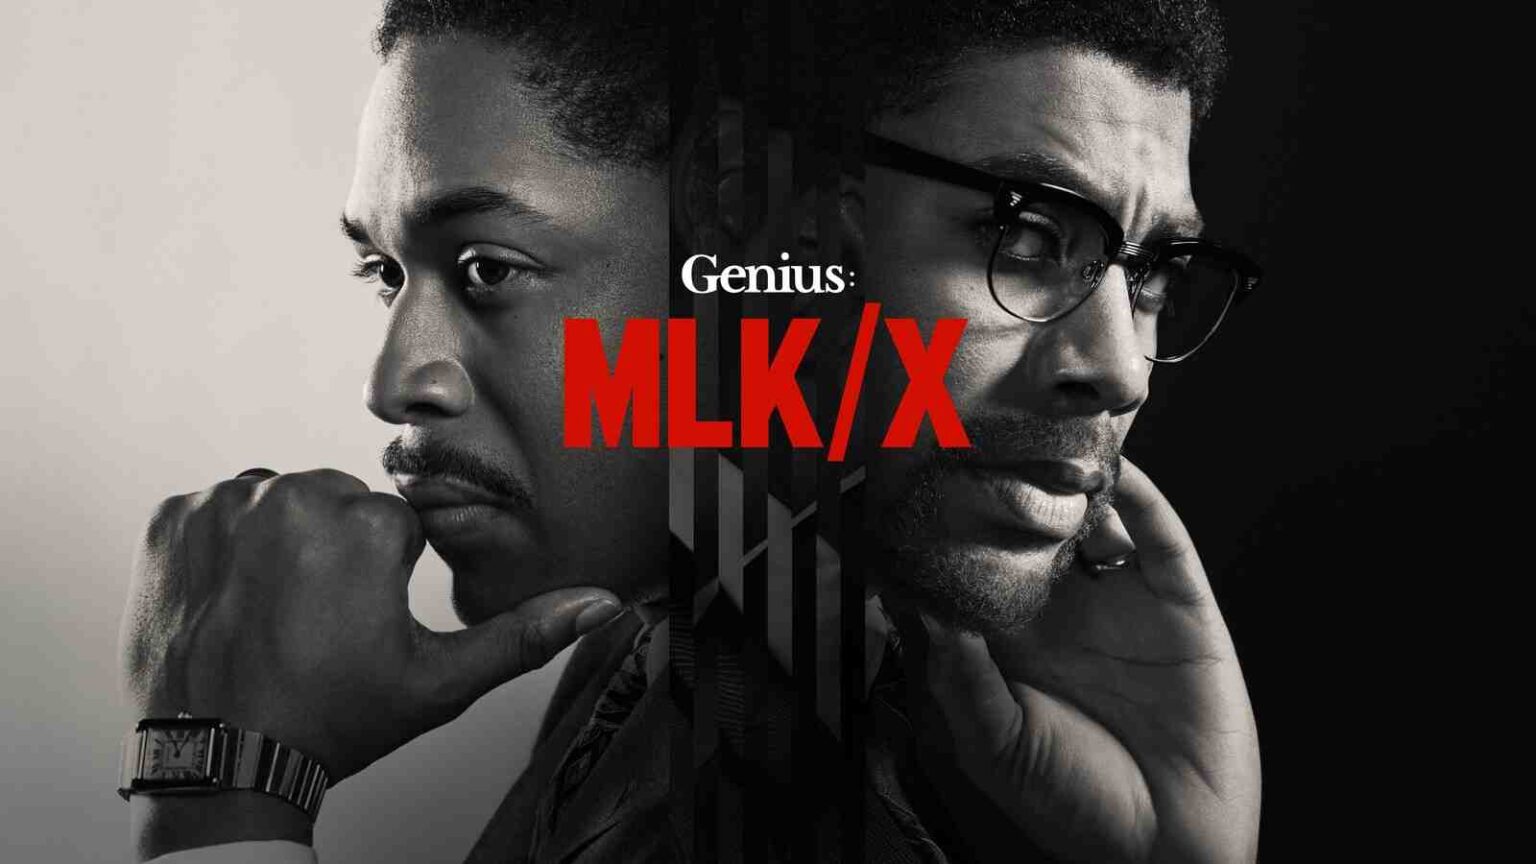 Immerse yourself in the captivating drama centered on Civil Rights heroes in "Genius: MLK/X". Prepare for truth-filled, heartrending storytelling like never before.